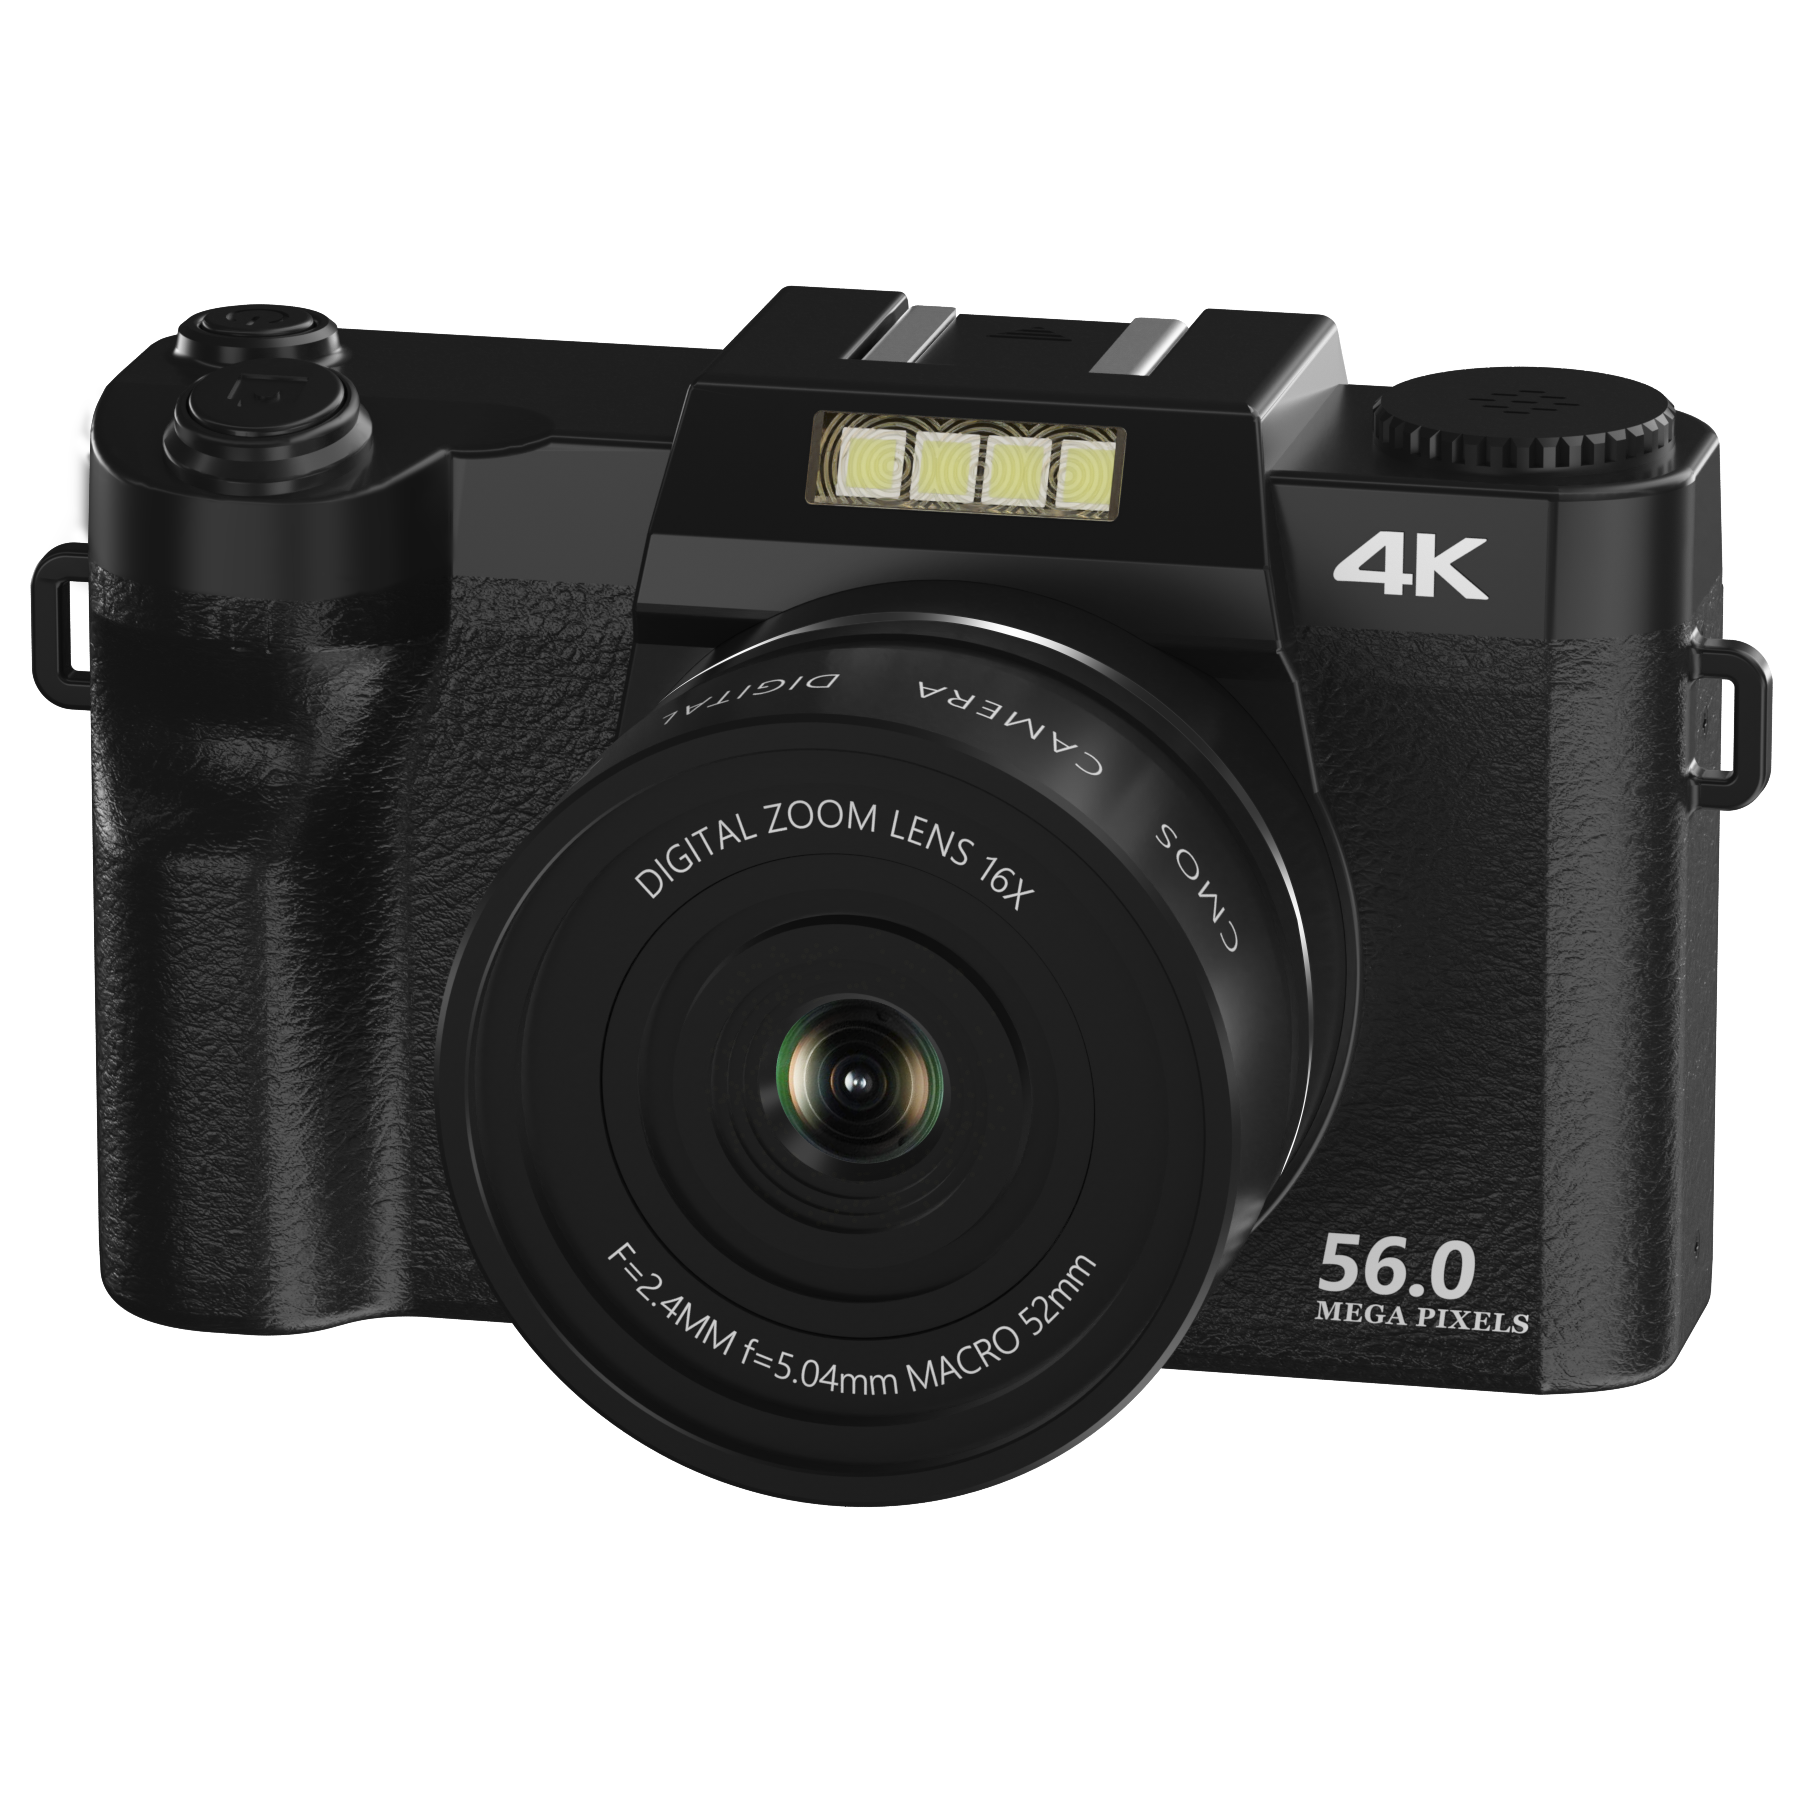 Capture the World in Stunning Detail with the AC-W03 Digital Camera